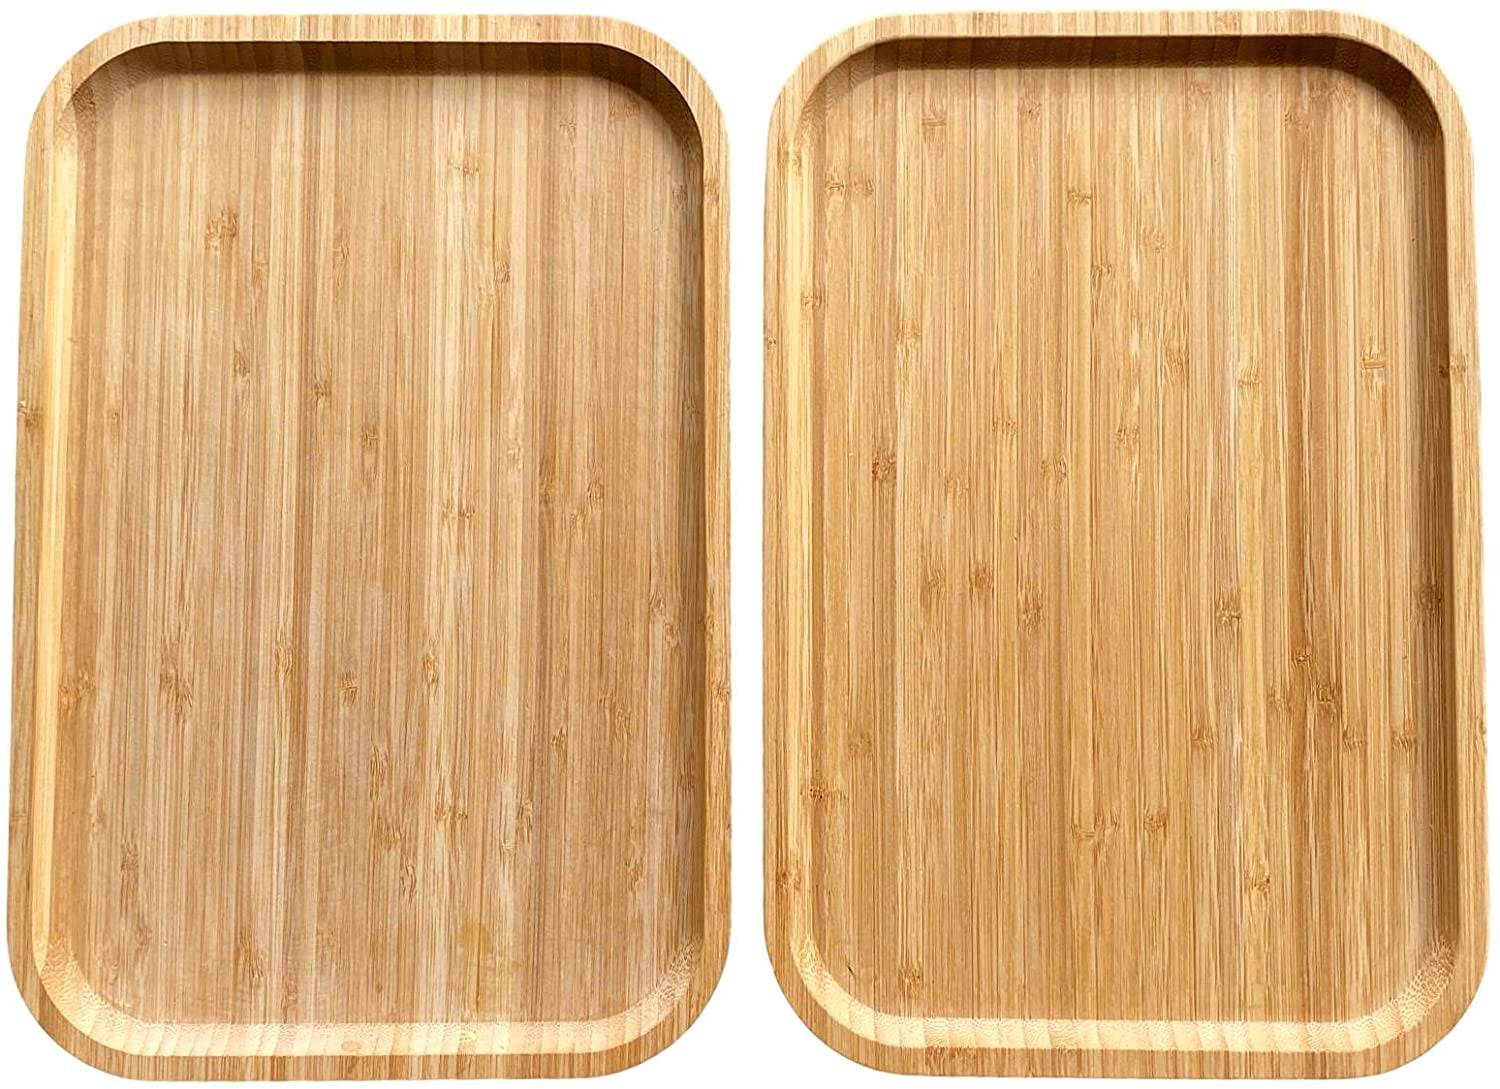 Bamboo Serving Platter Tray Cheese Charcuterie Decorative Bathroom Kitchen Dish Eco-Friendly Wood 1 Large 15.75 x 11.75, Natural Bamboo 